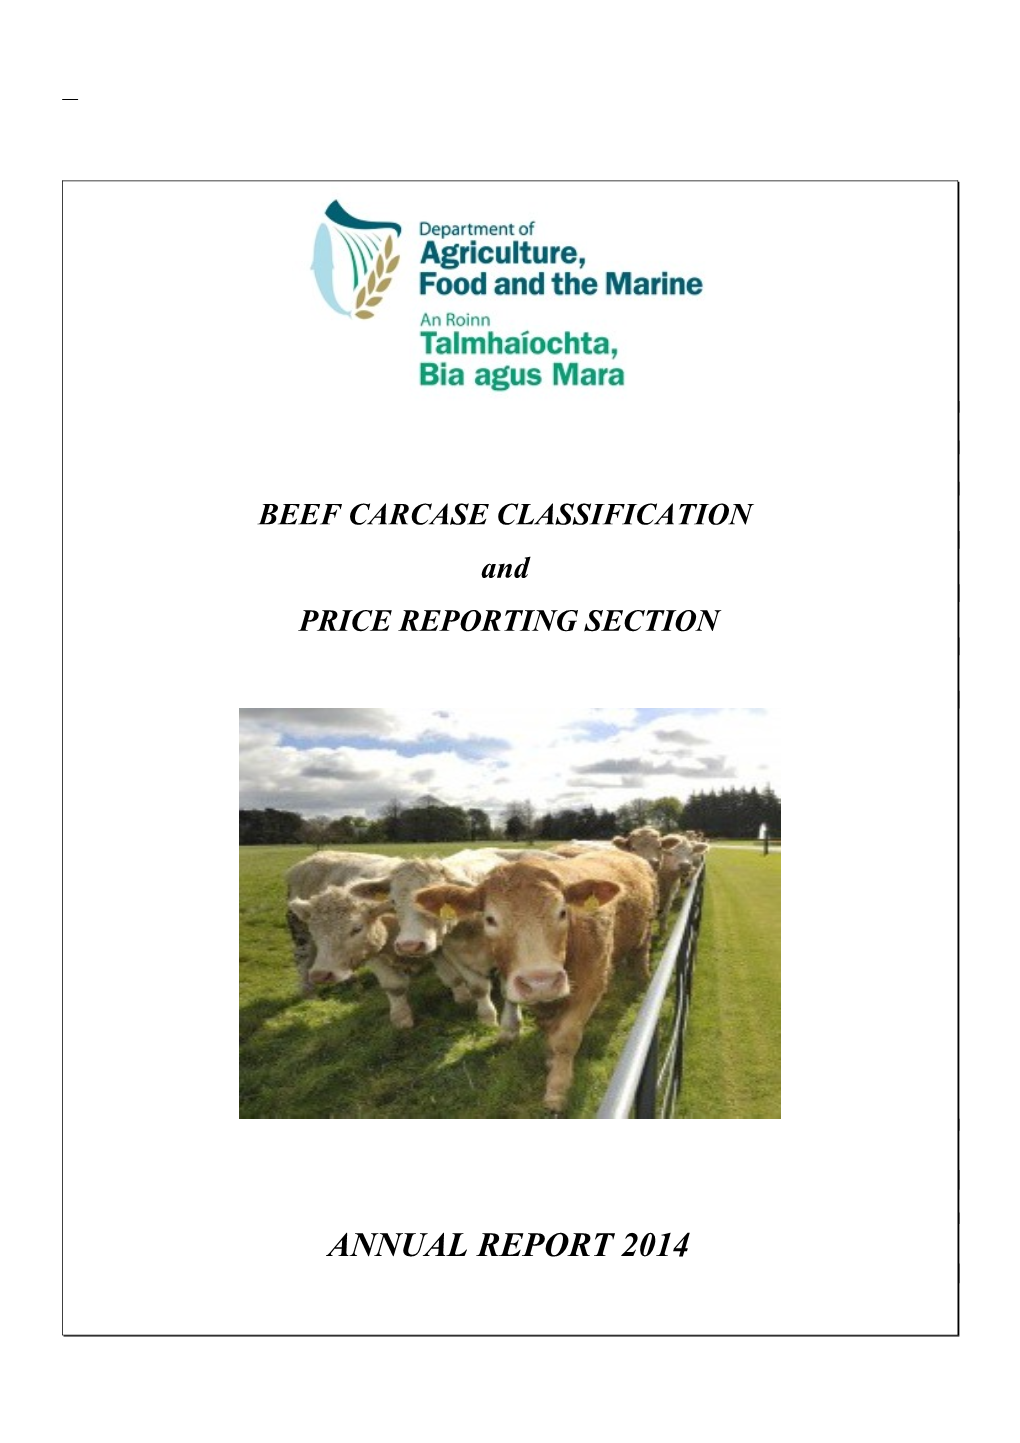 Beef Carcase Classification and Price Reporting - Annual Report 2014